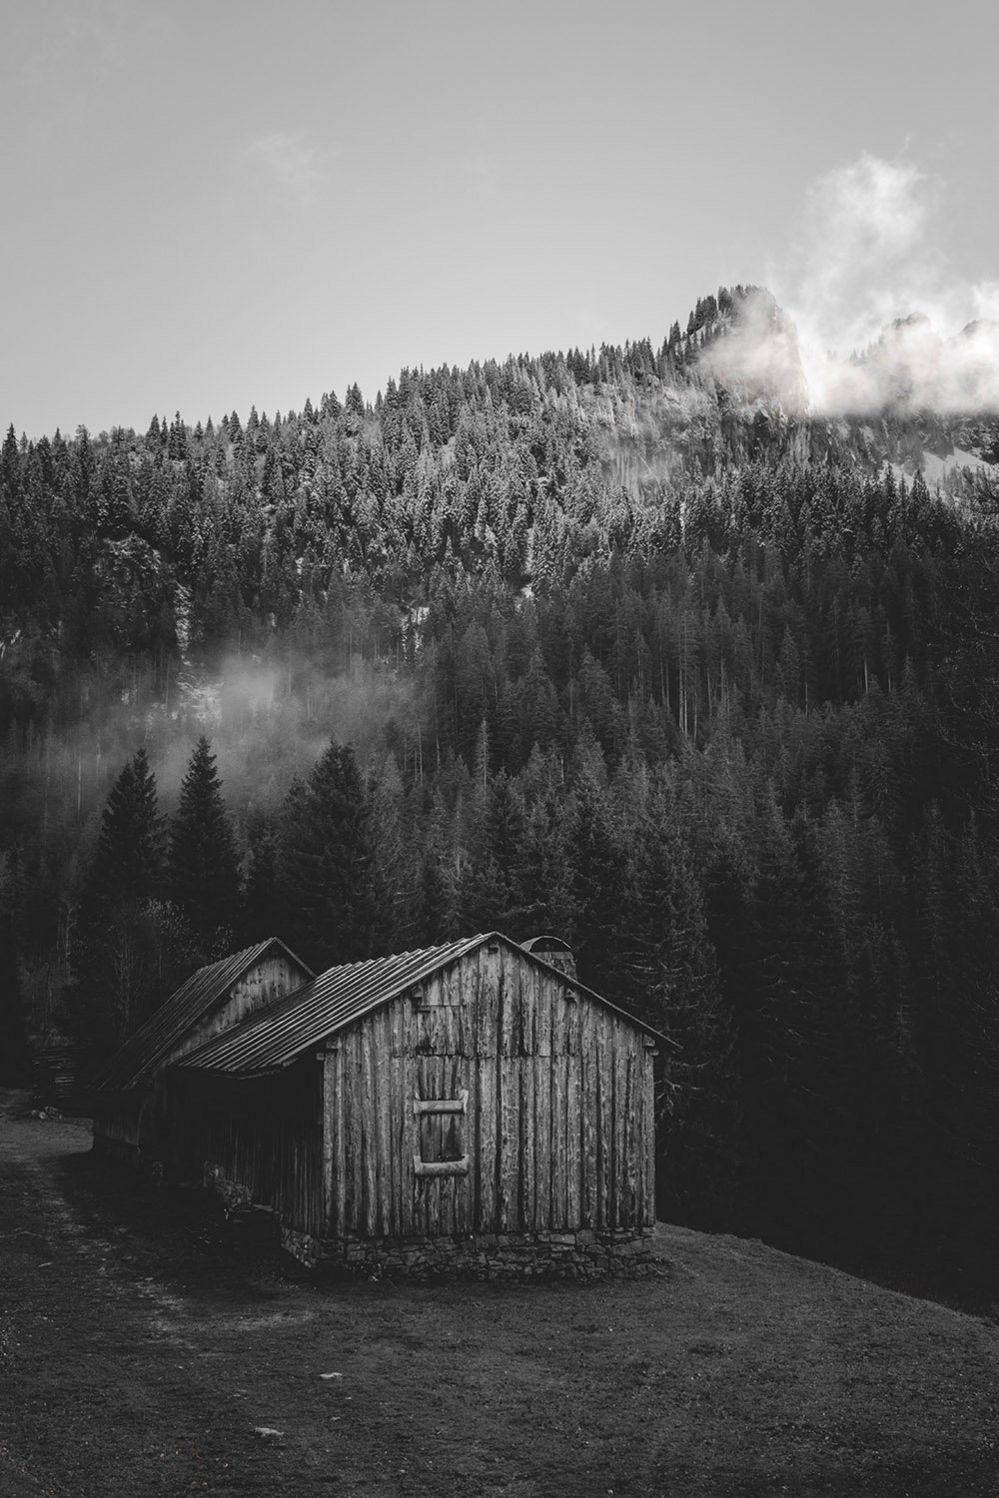 A hut in the French Alps